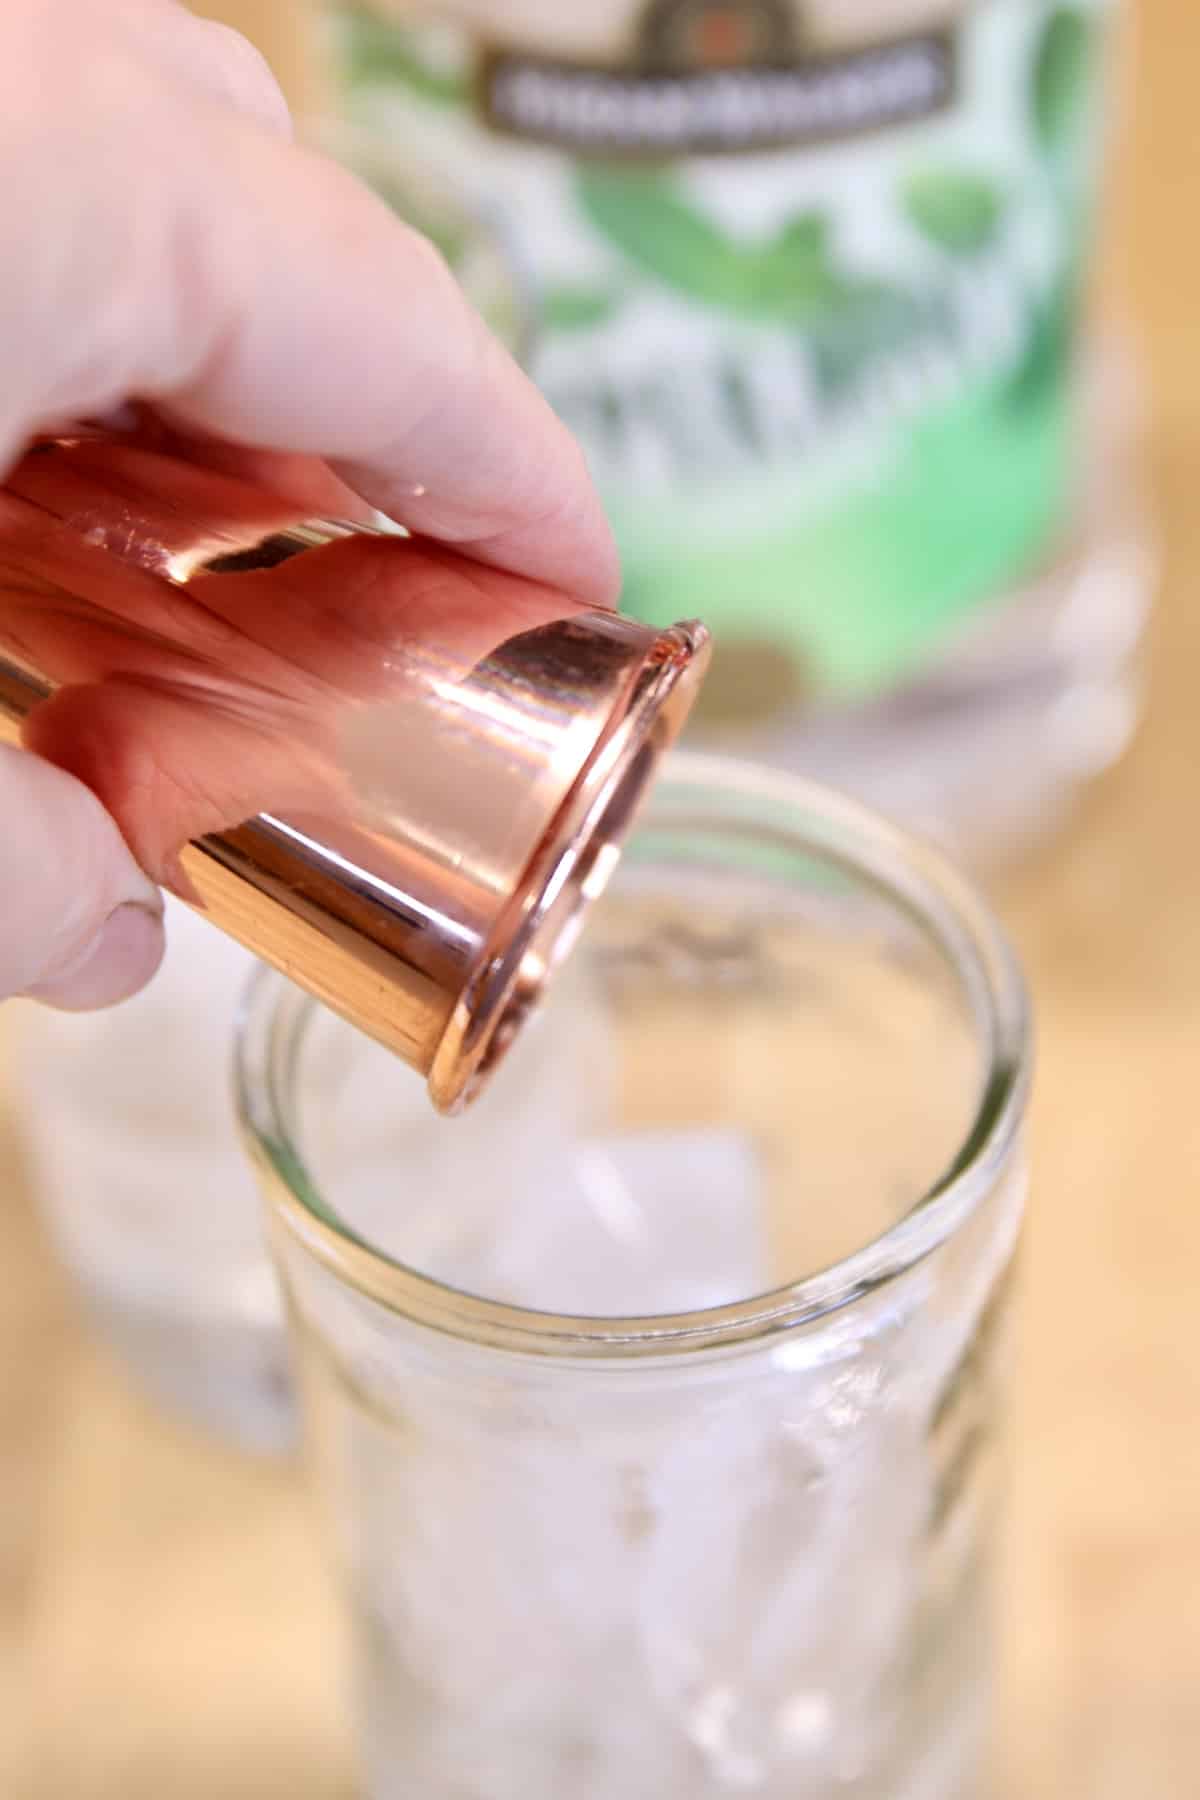 Pouring peppermint schnapps into a glass of ice.